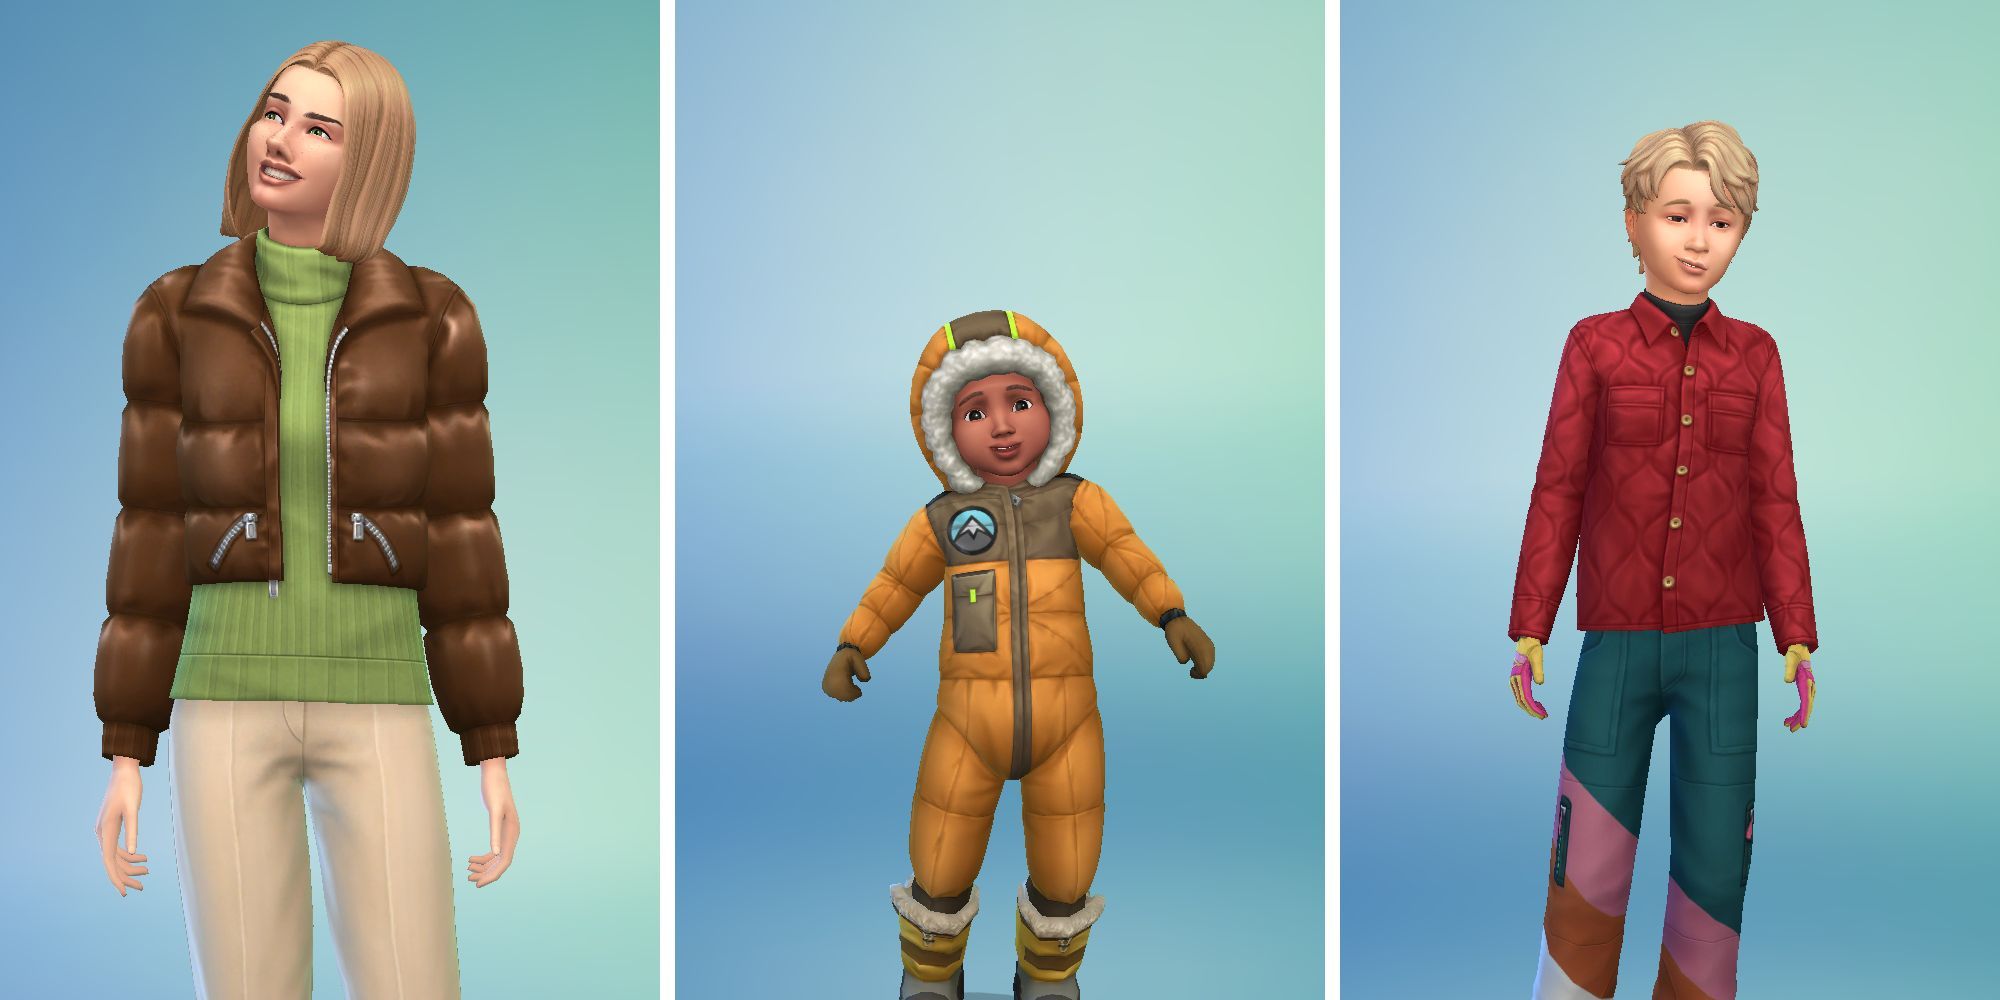 Three images of Sims in Sims 4 Create A Sim. One is a brown puffer jacket, a toddler wearing an orange snow suit, and a child in a red jacket